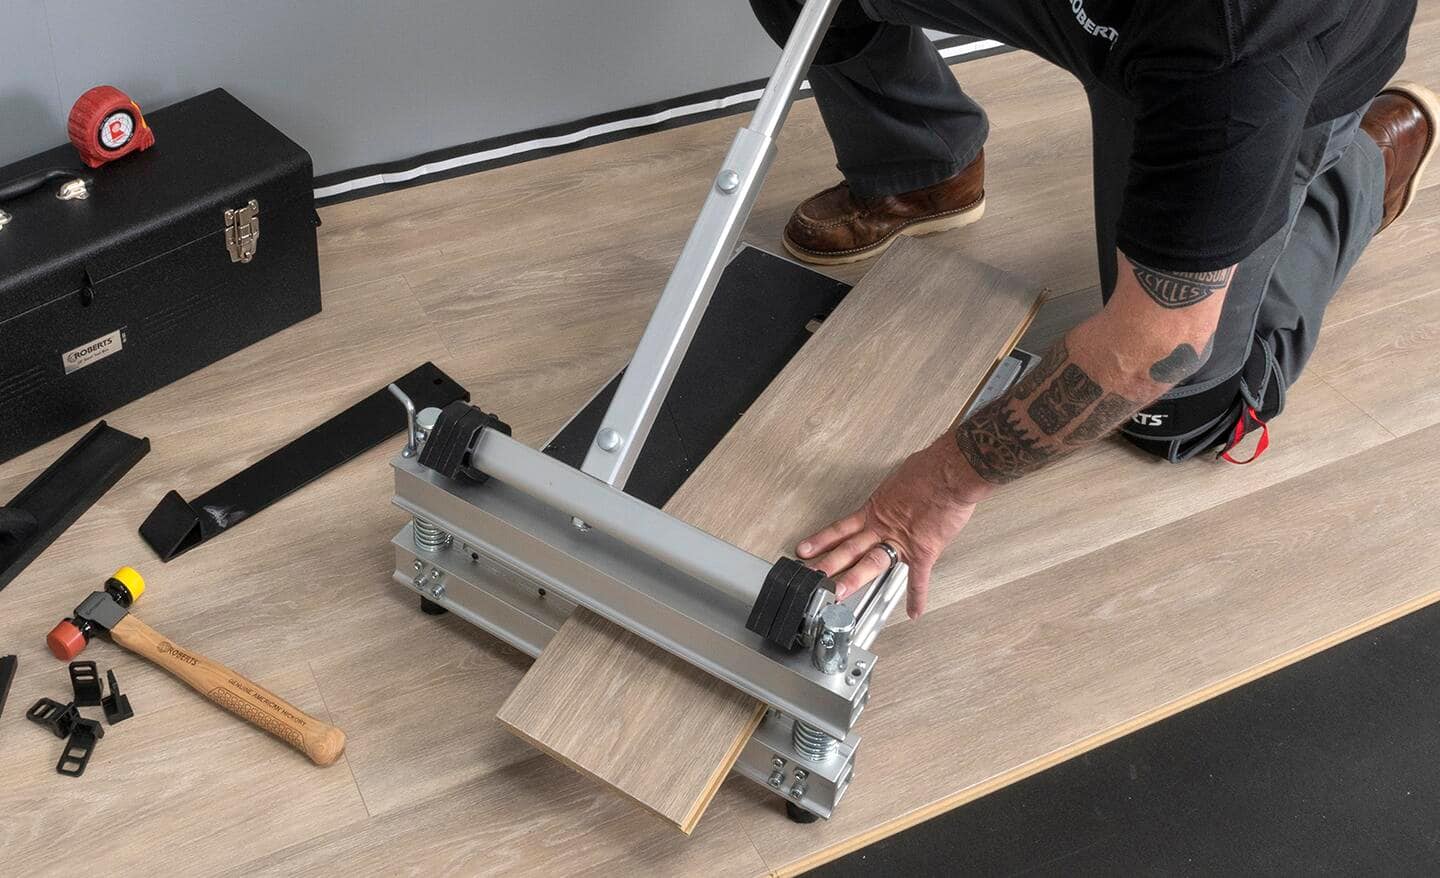 A person uses a vinyl cutter to trim a luxury vinyl plank.